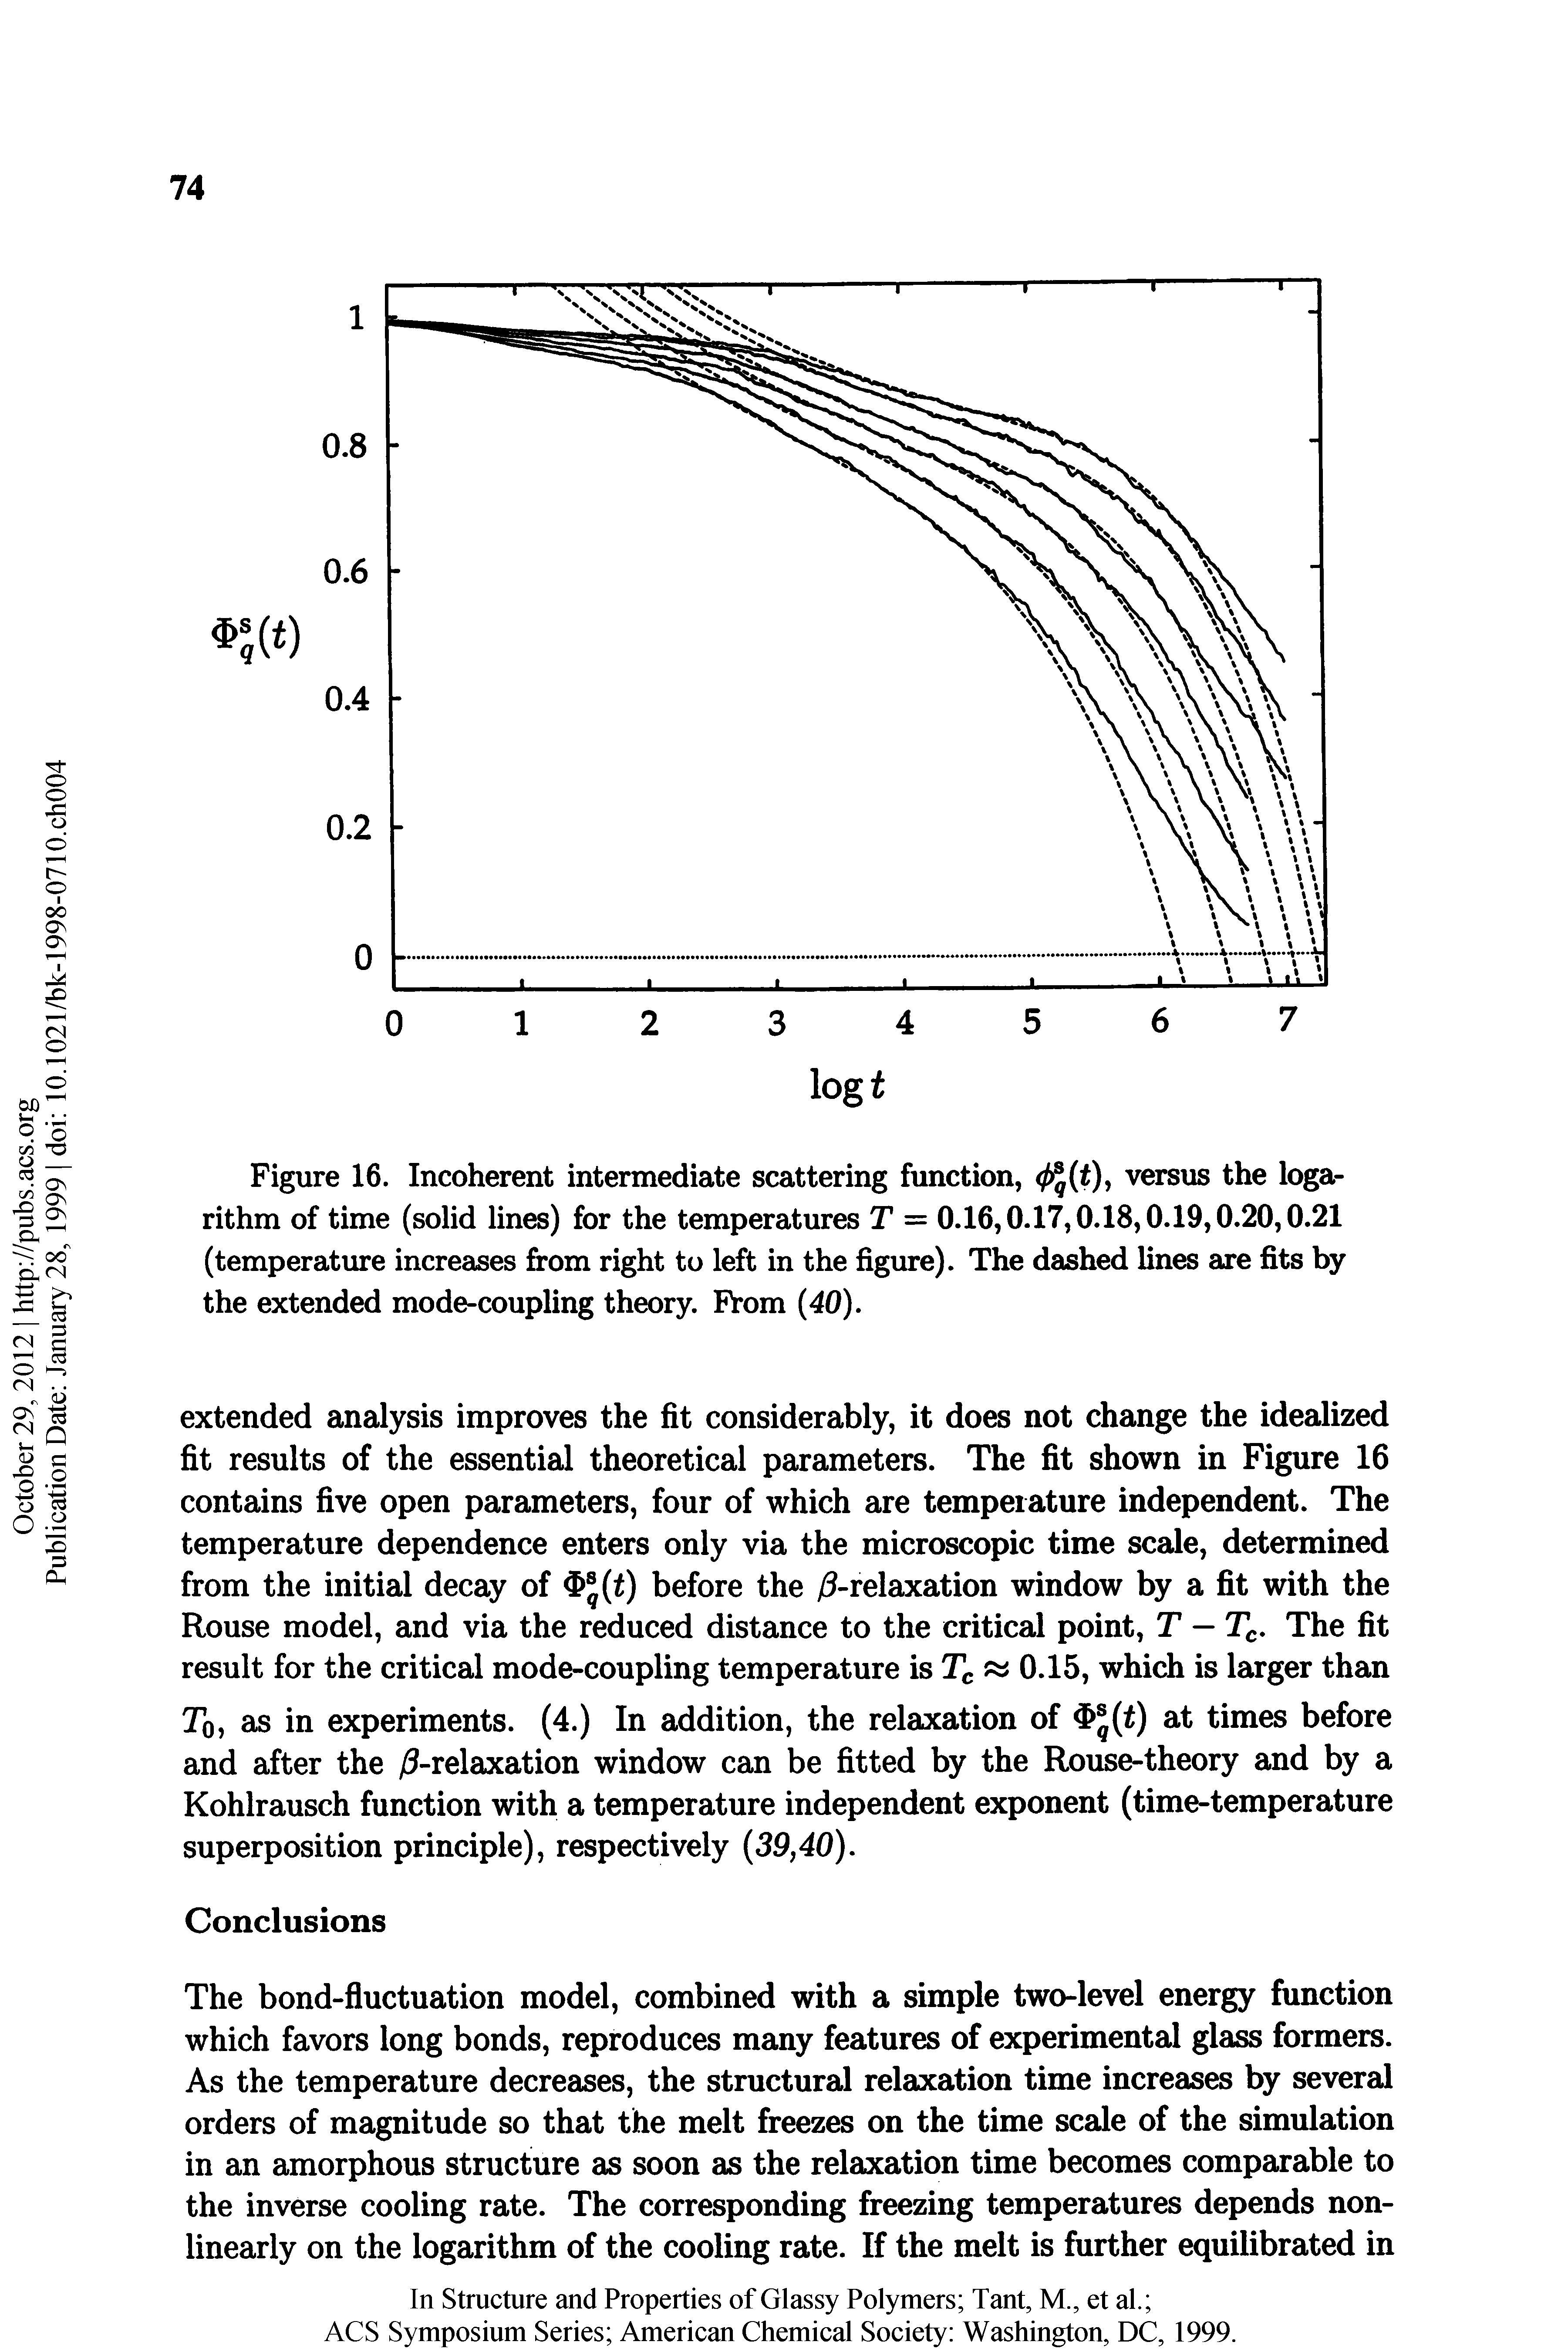 Figure 16. Incoherent intermediate scattering function, (t), versus the logarithm of time (solid lines) for the temperatures T = 0.16,0.17,0.18,0.19,0.20,0.21 (temperature increases om right to left in the figure). The dashed lines are fits by the extended mode-coupling theory. Prom 40).